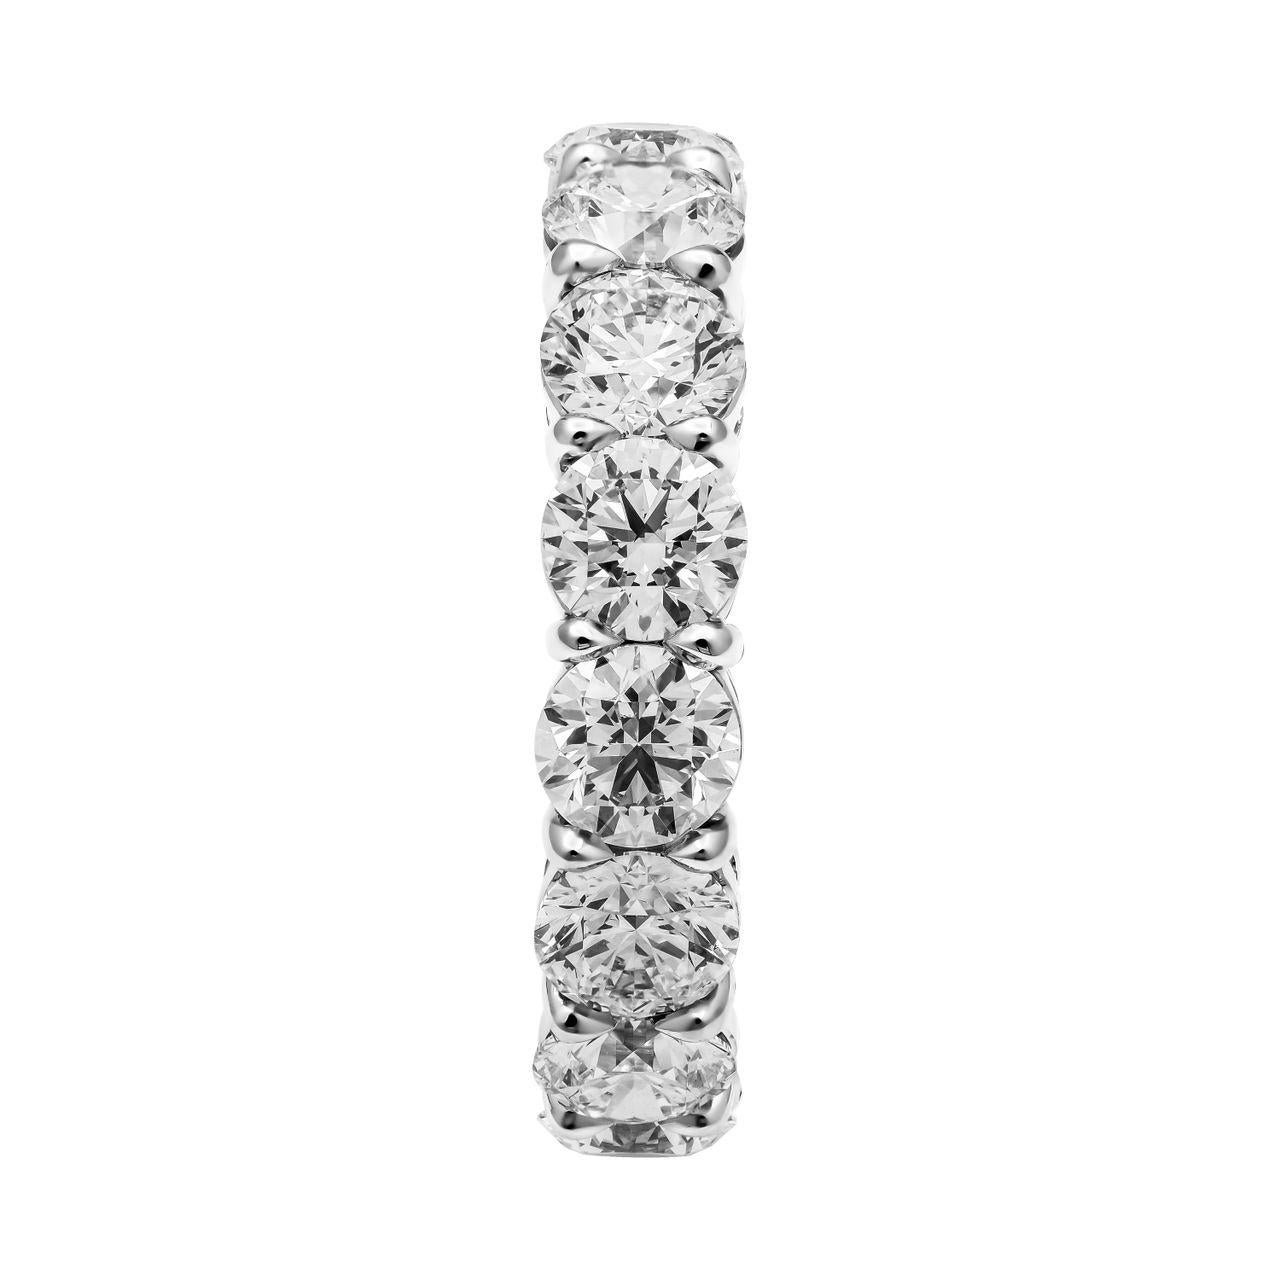 GIA Certified 6 carats total, eternity diamond style, Handcrafted,  mounted in Platinum 950, a total of 15 GIA certified Round cut diamonds totaling 6ct total, 0.40ct each stone, color ranging between G and F, with a clarity of VS1 and VS2, eye